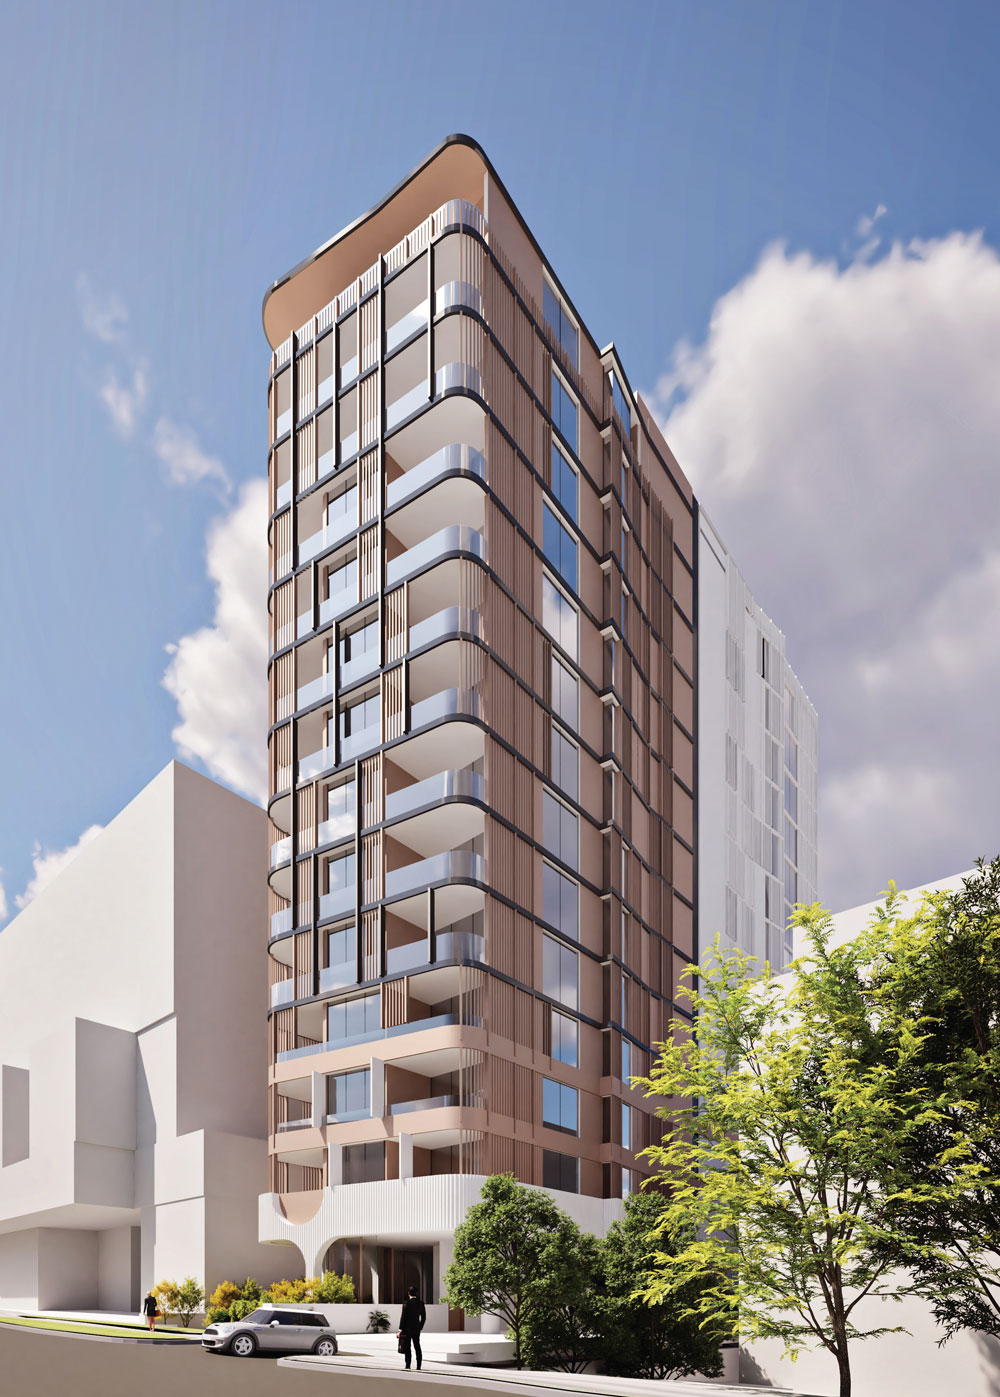 Architectural rendering of building 3 of Keylin's proposed built-to-rent development on Station Rd, Indooroopilly